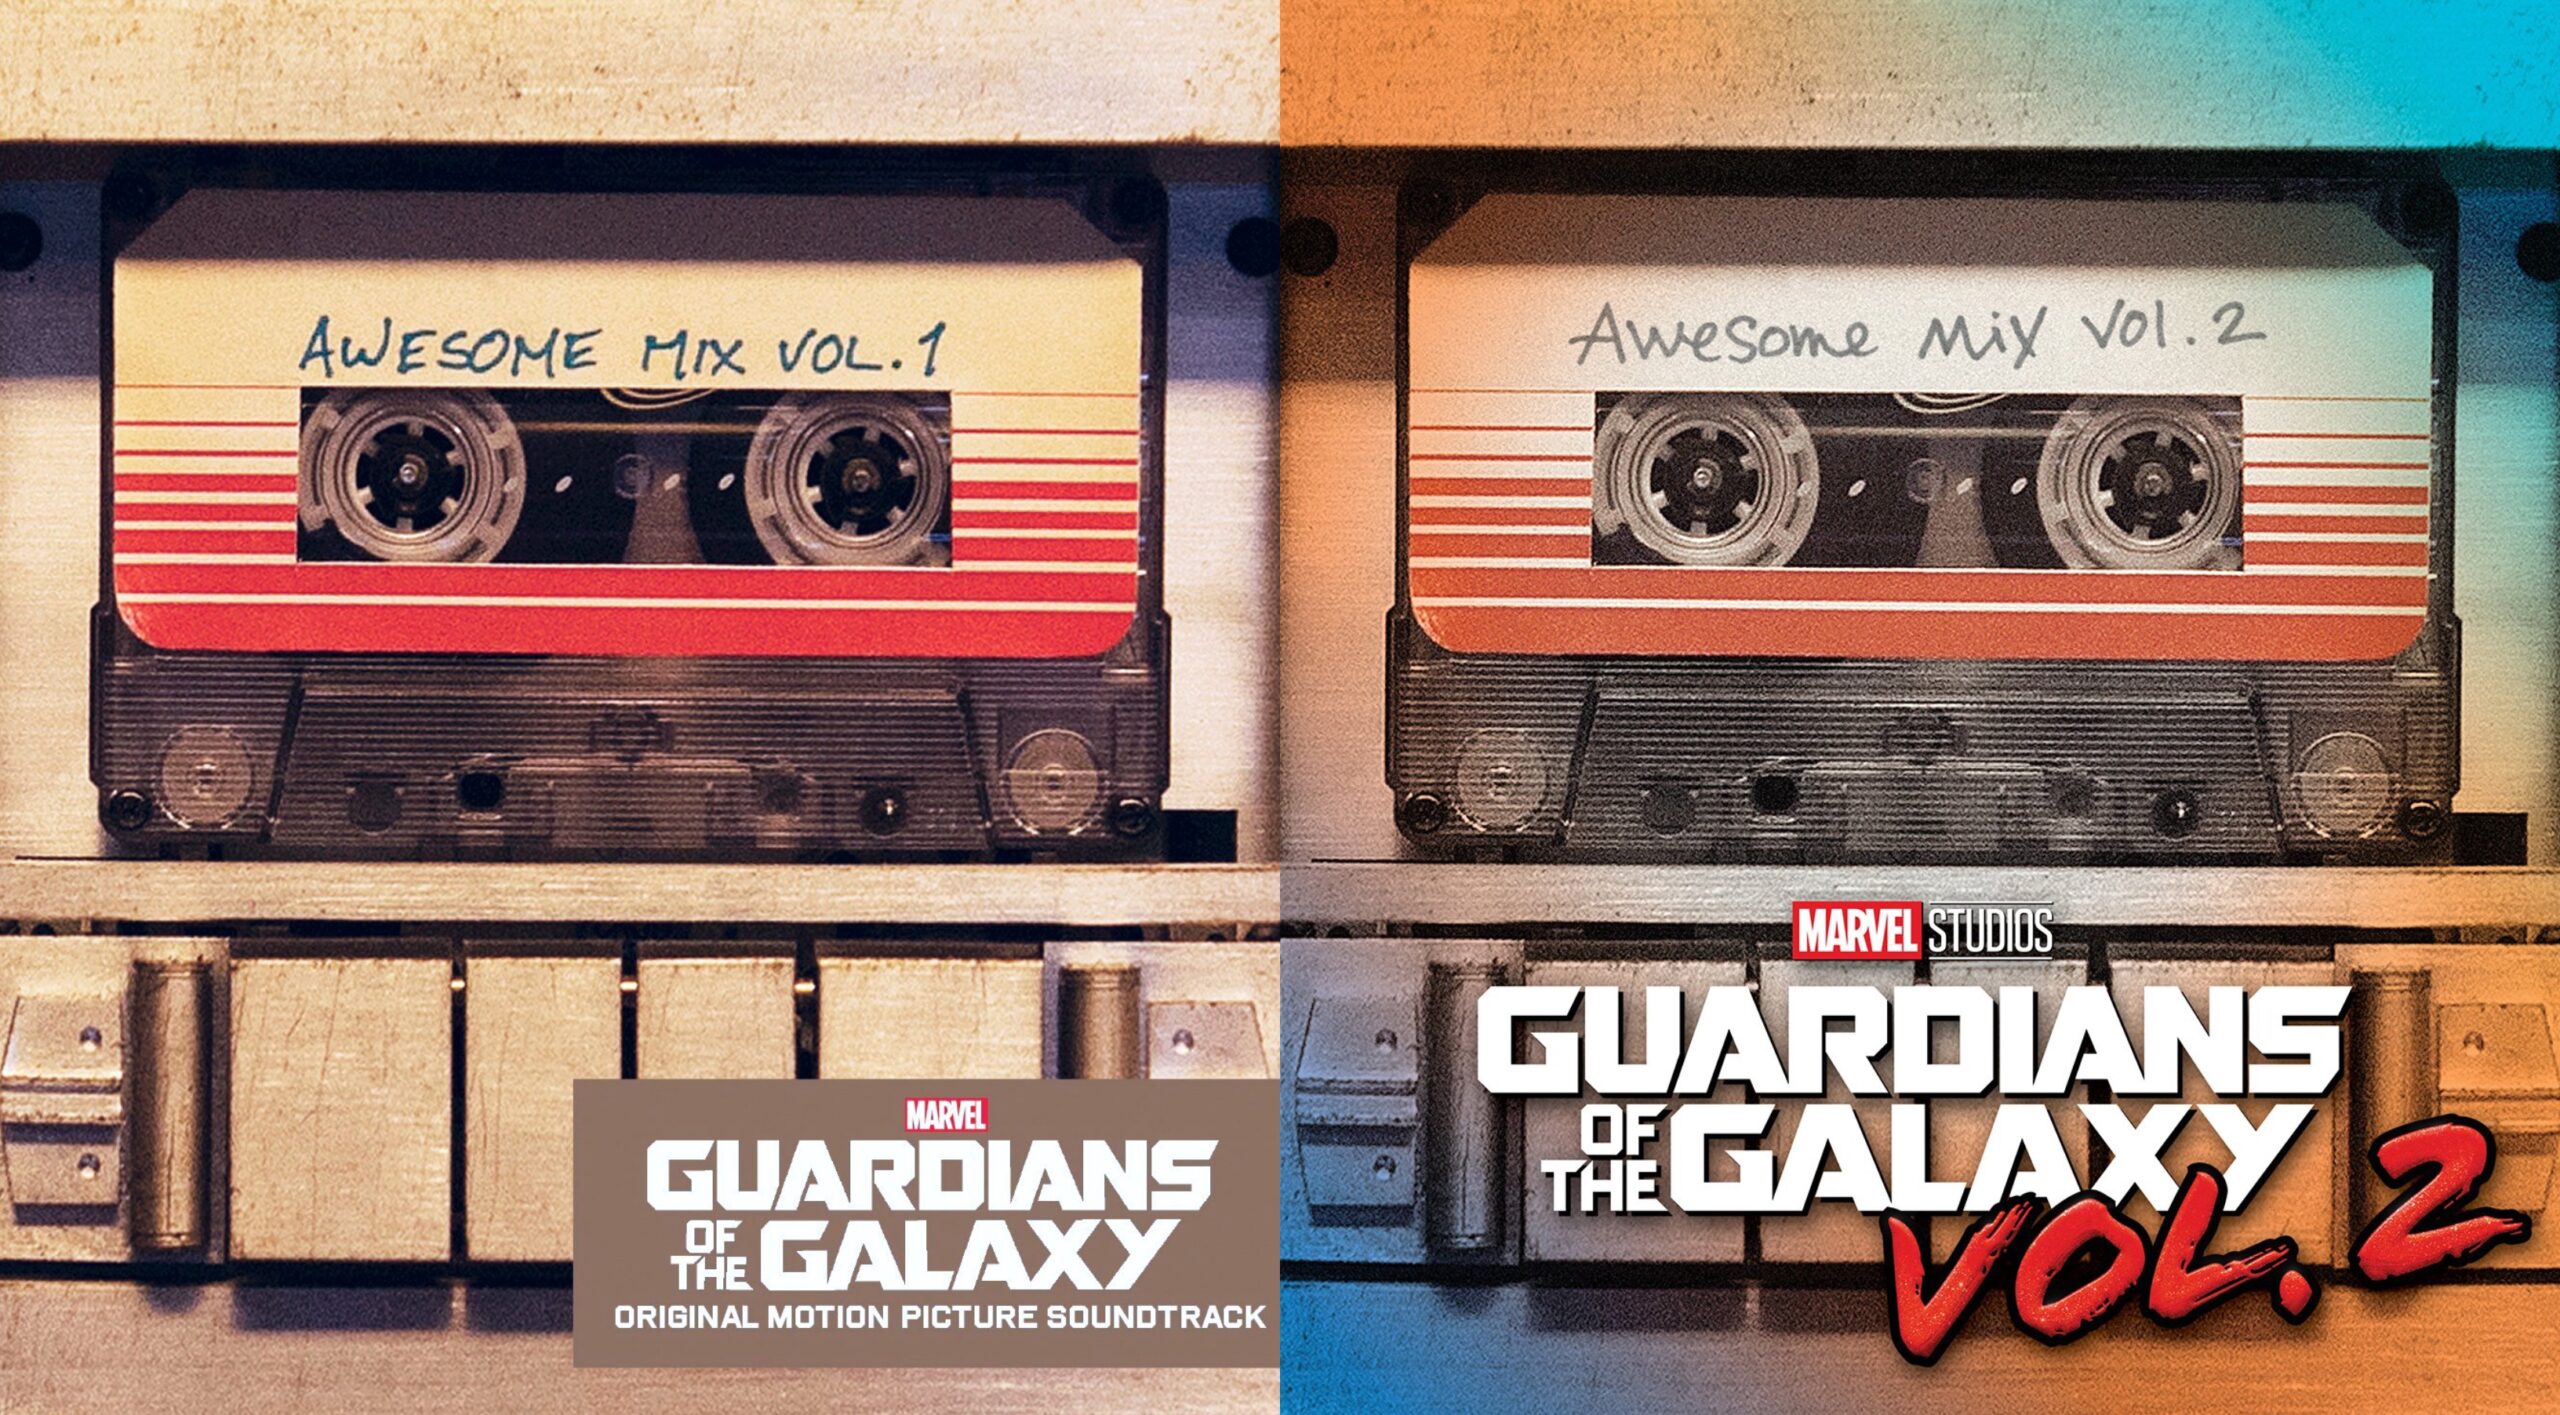 Awesome Mix Vol 1 and 2 covers